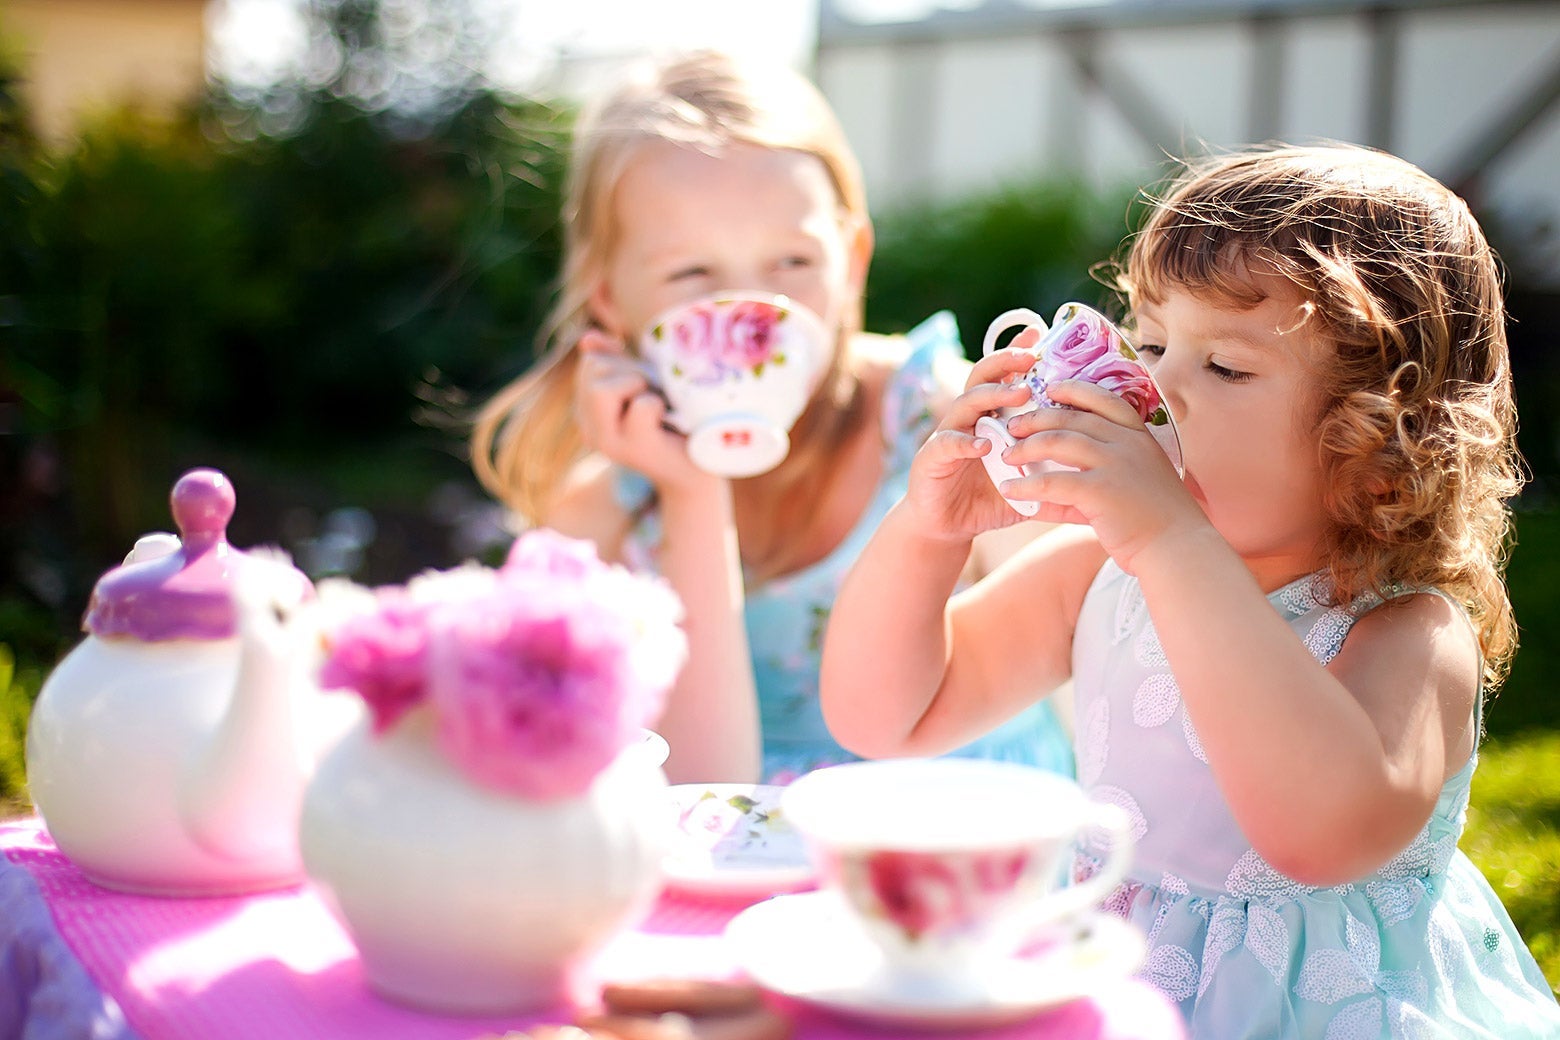 Two young girls dressed like princesses have a tea party